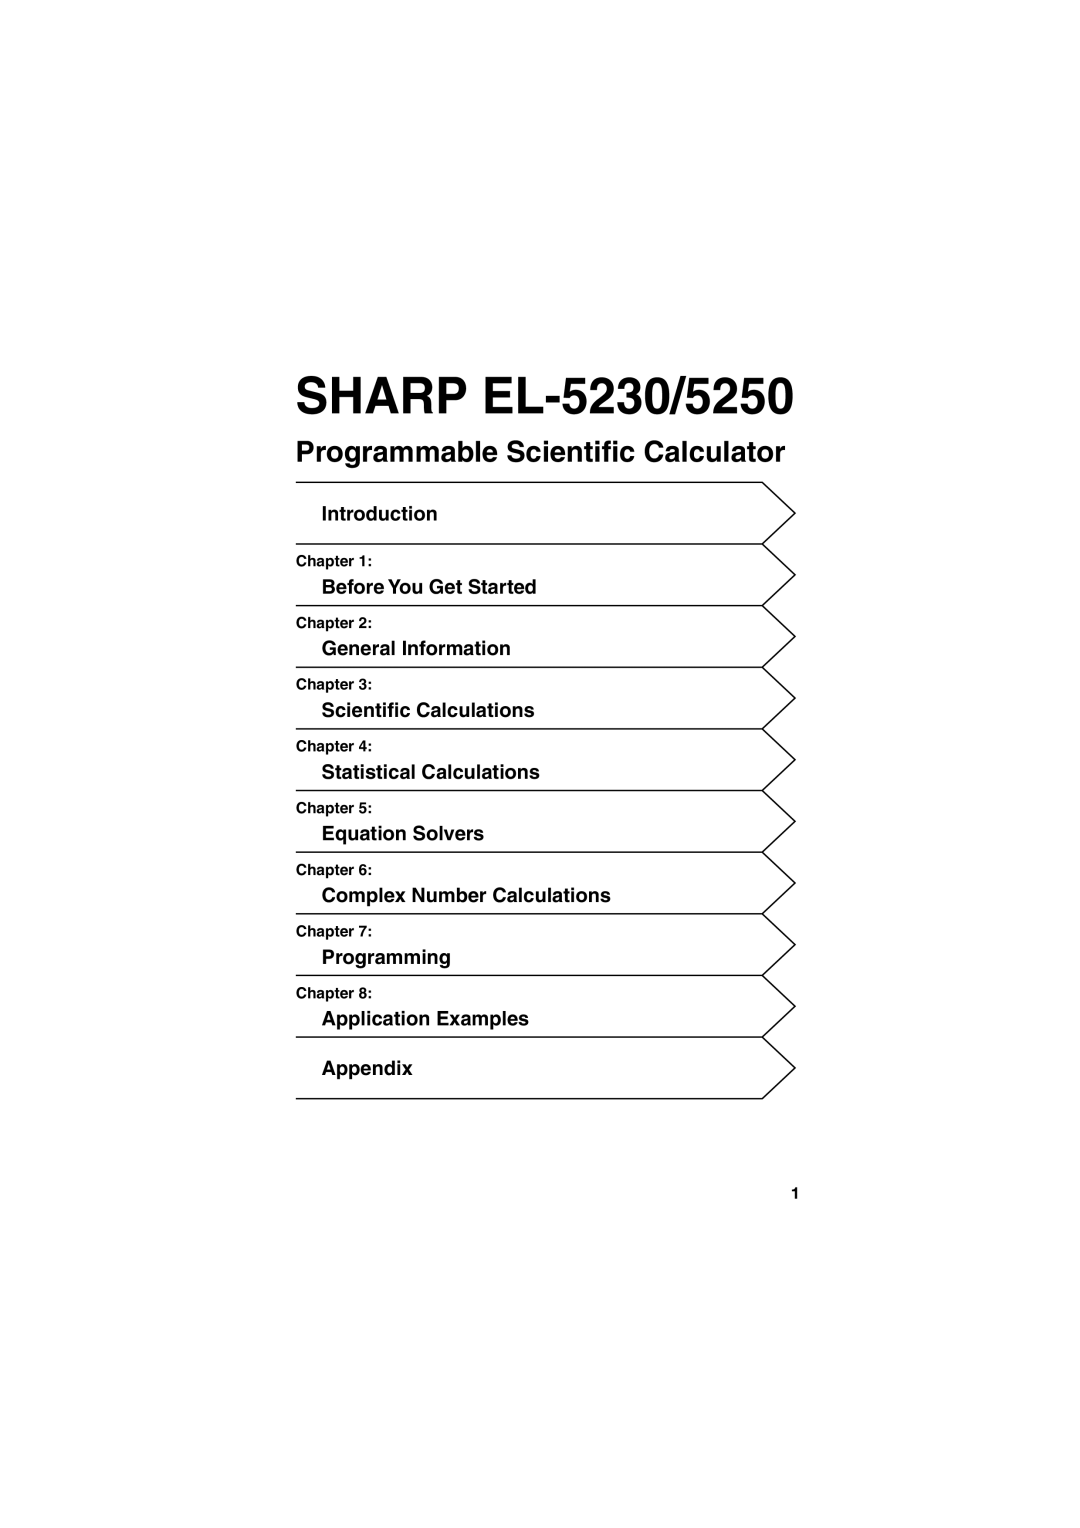 Sharp EL-5230 Programmable Scientific Calculator, Introduction, Before You Get Started, General Information, Programming 